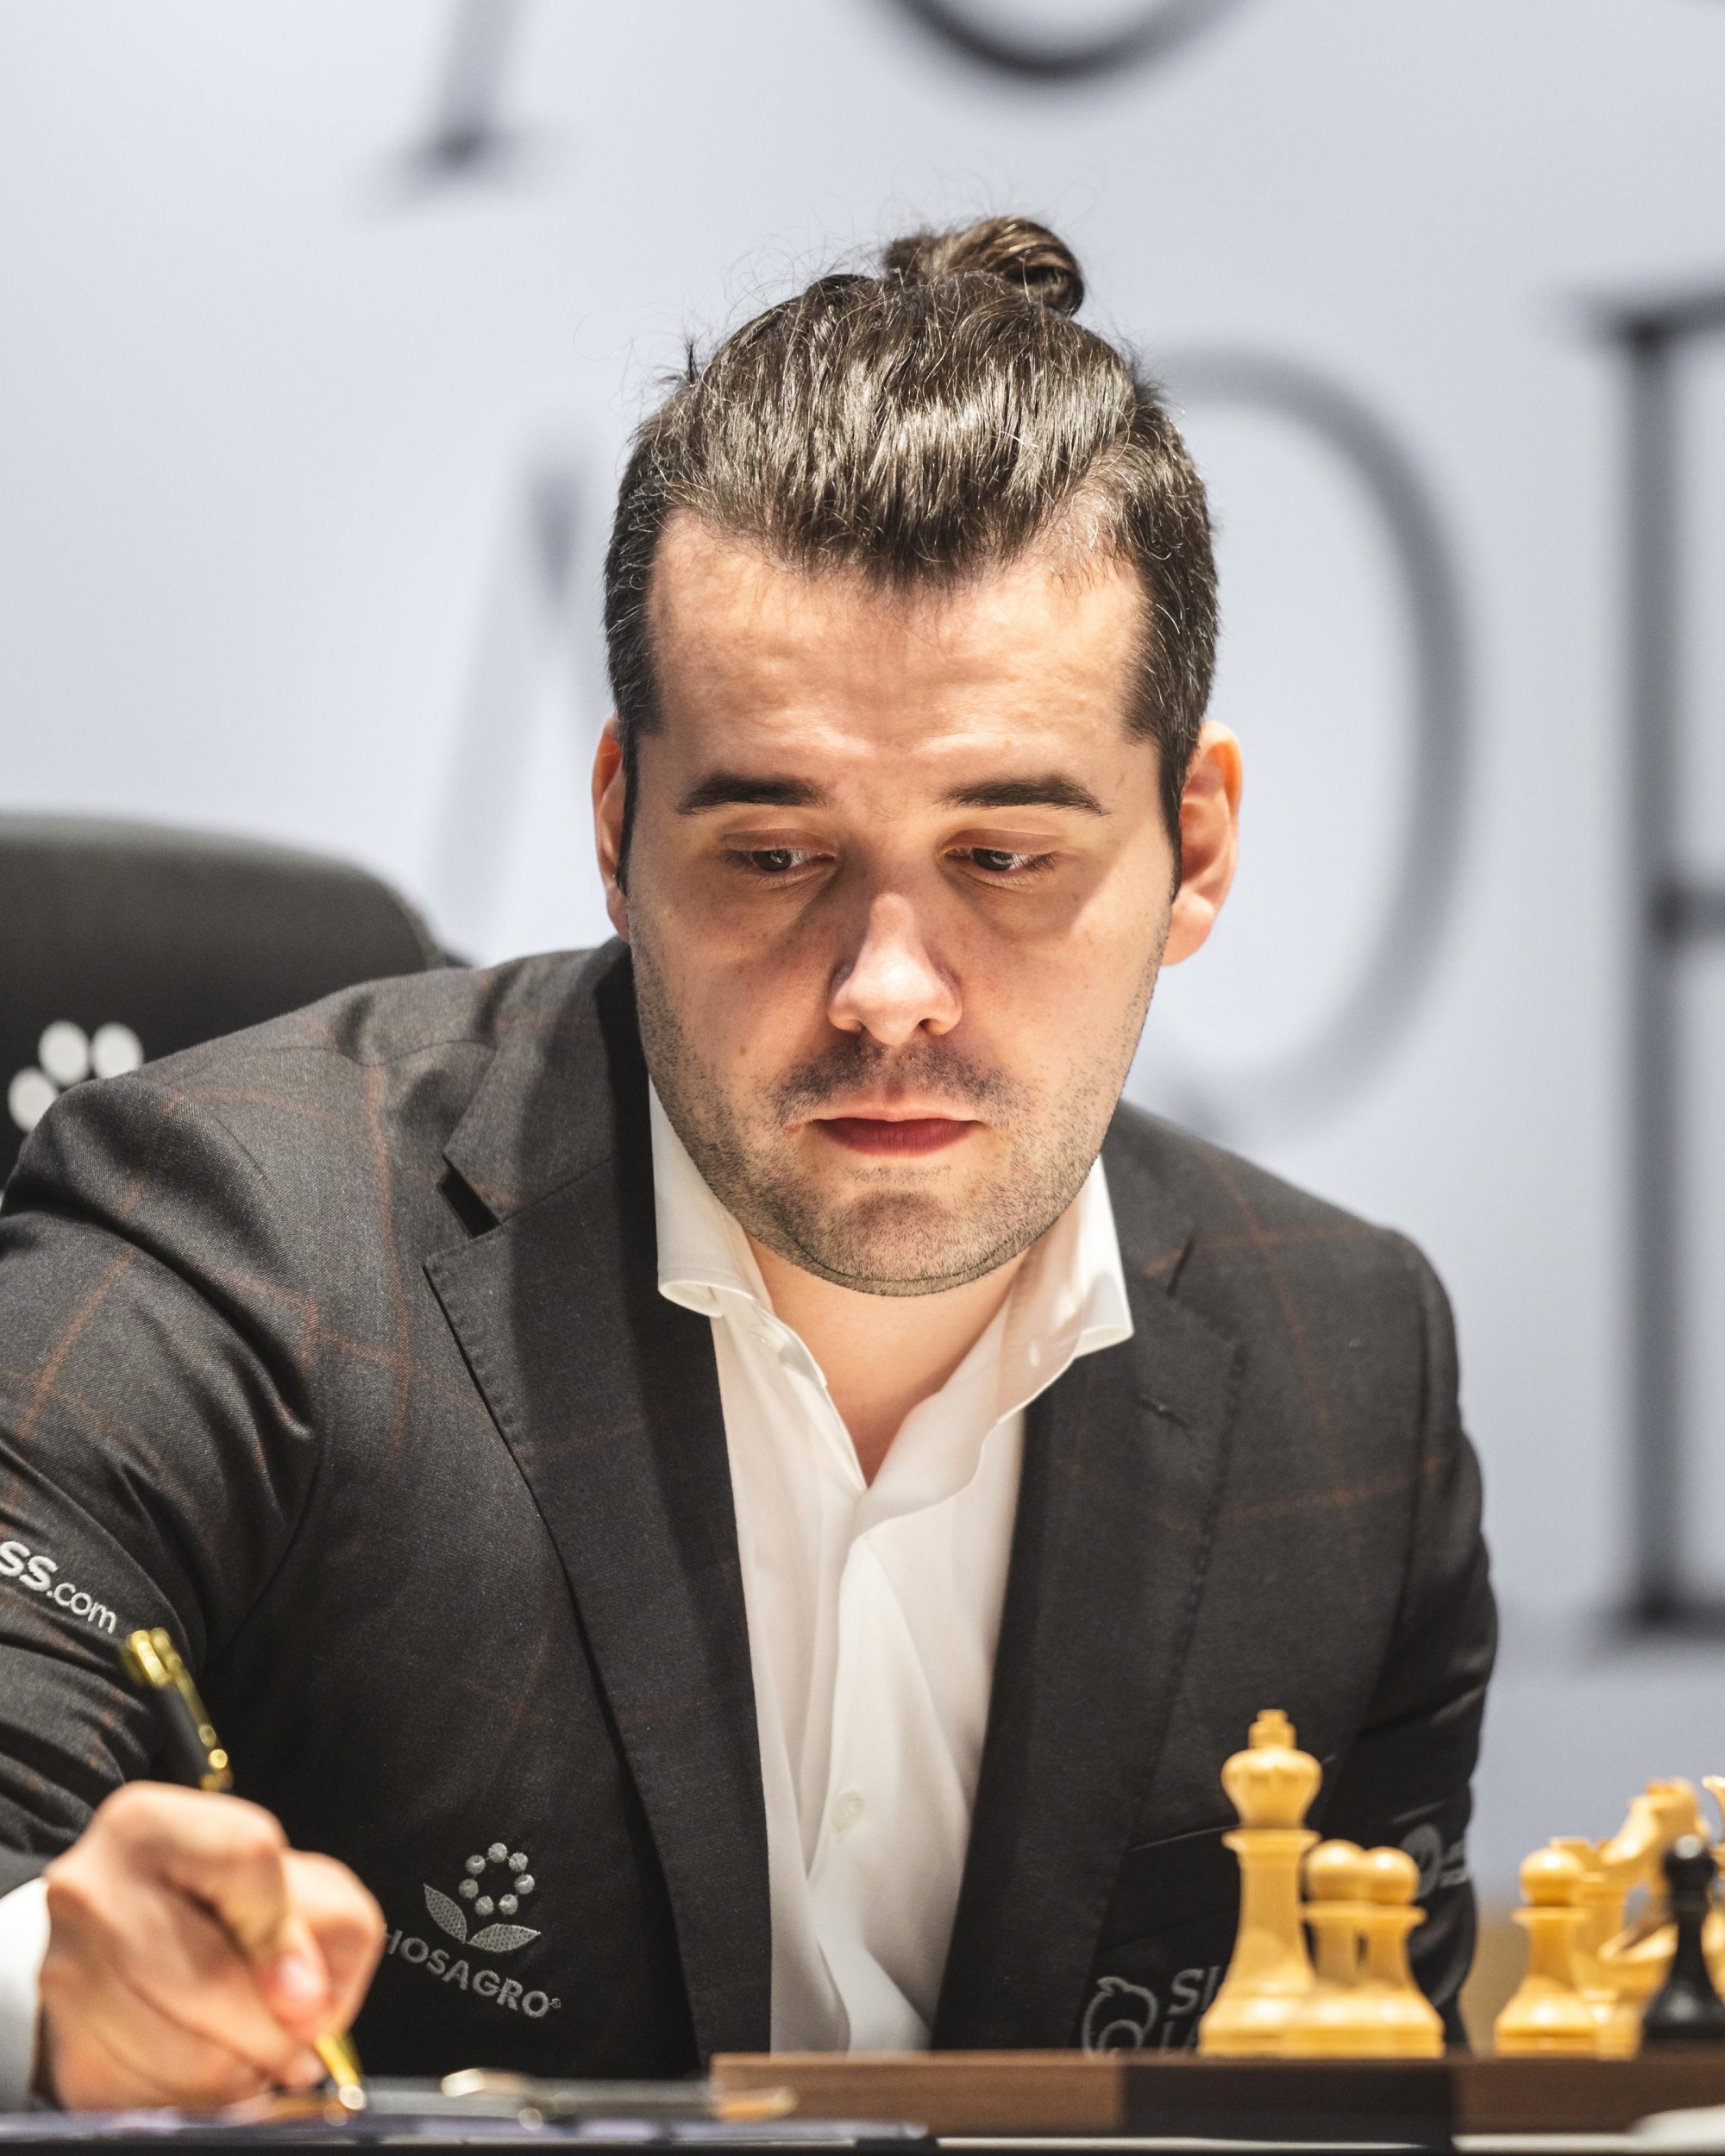 Ian Nepomniachtchi during the FIDE World Chess Championship Game 7 at Dubai Exhibition Centre (DEC) Web Image m16843